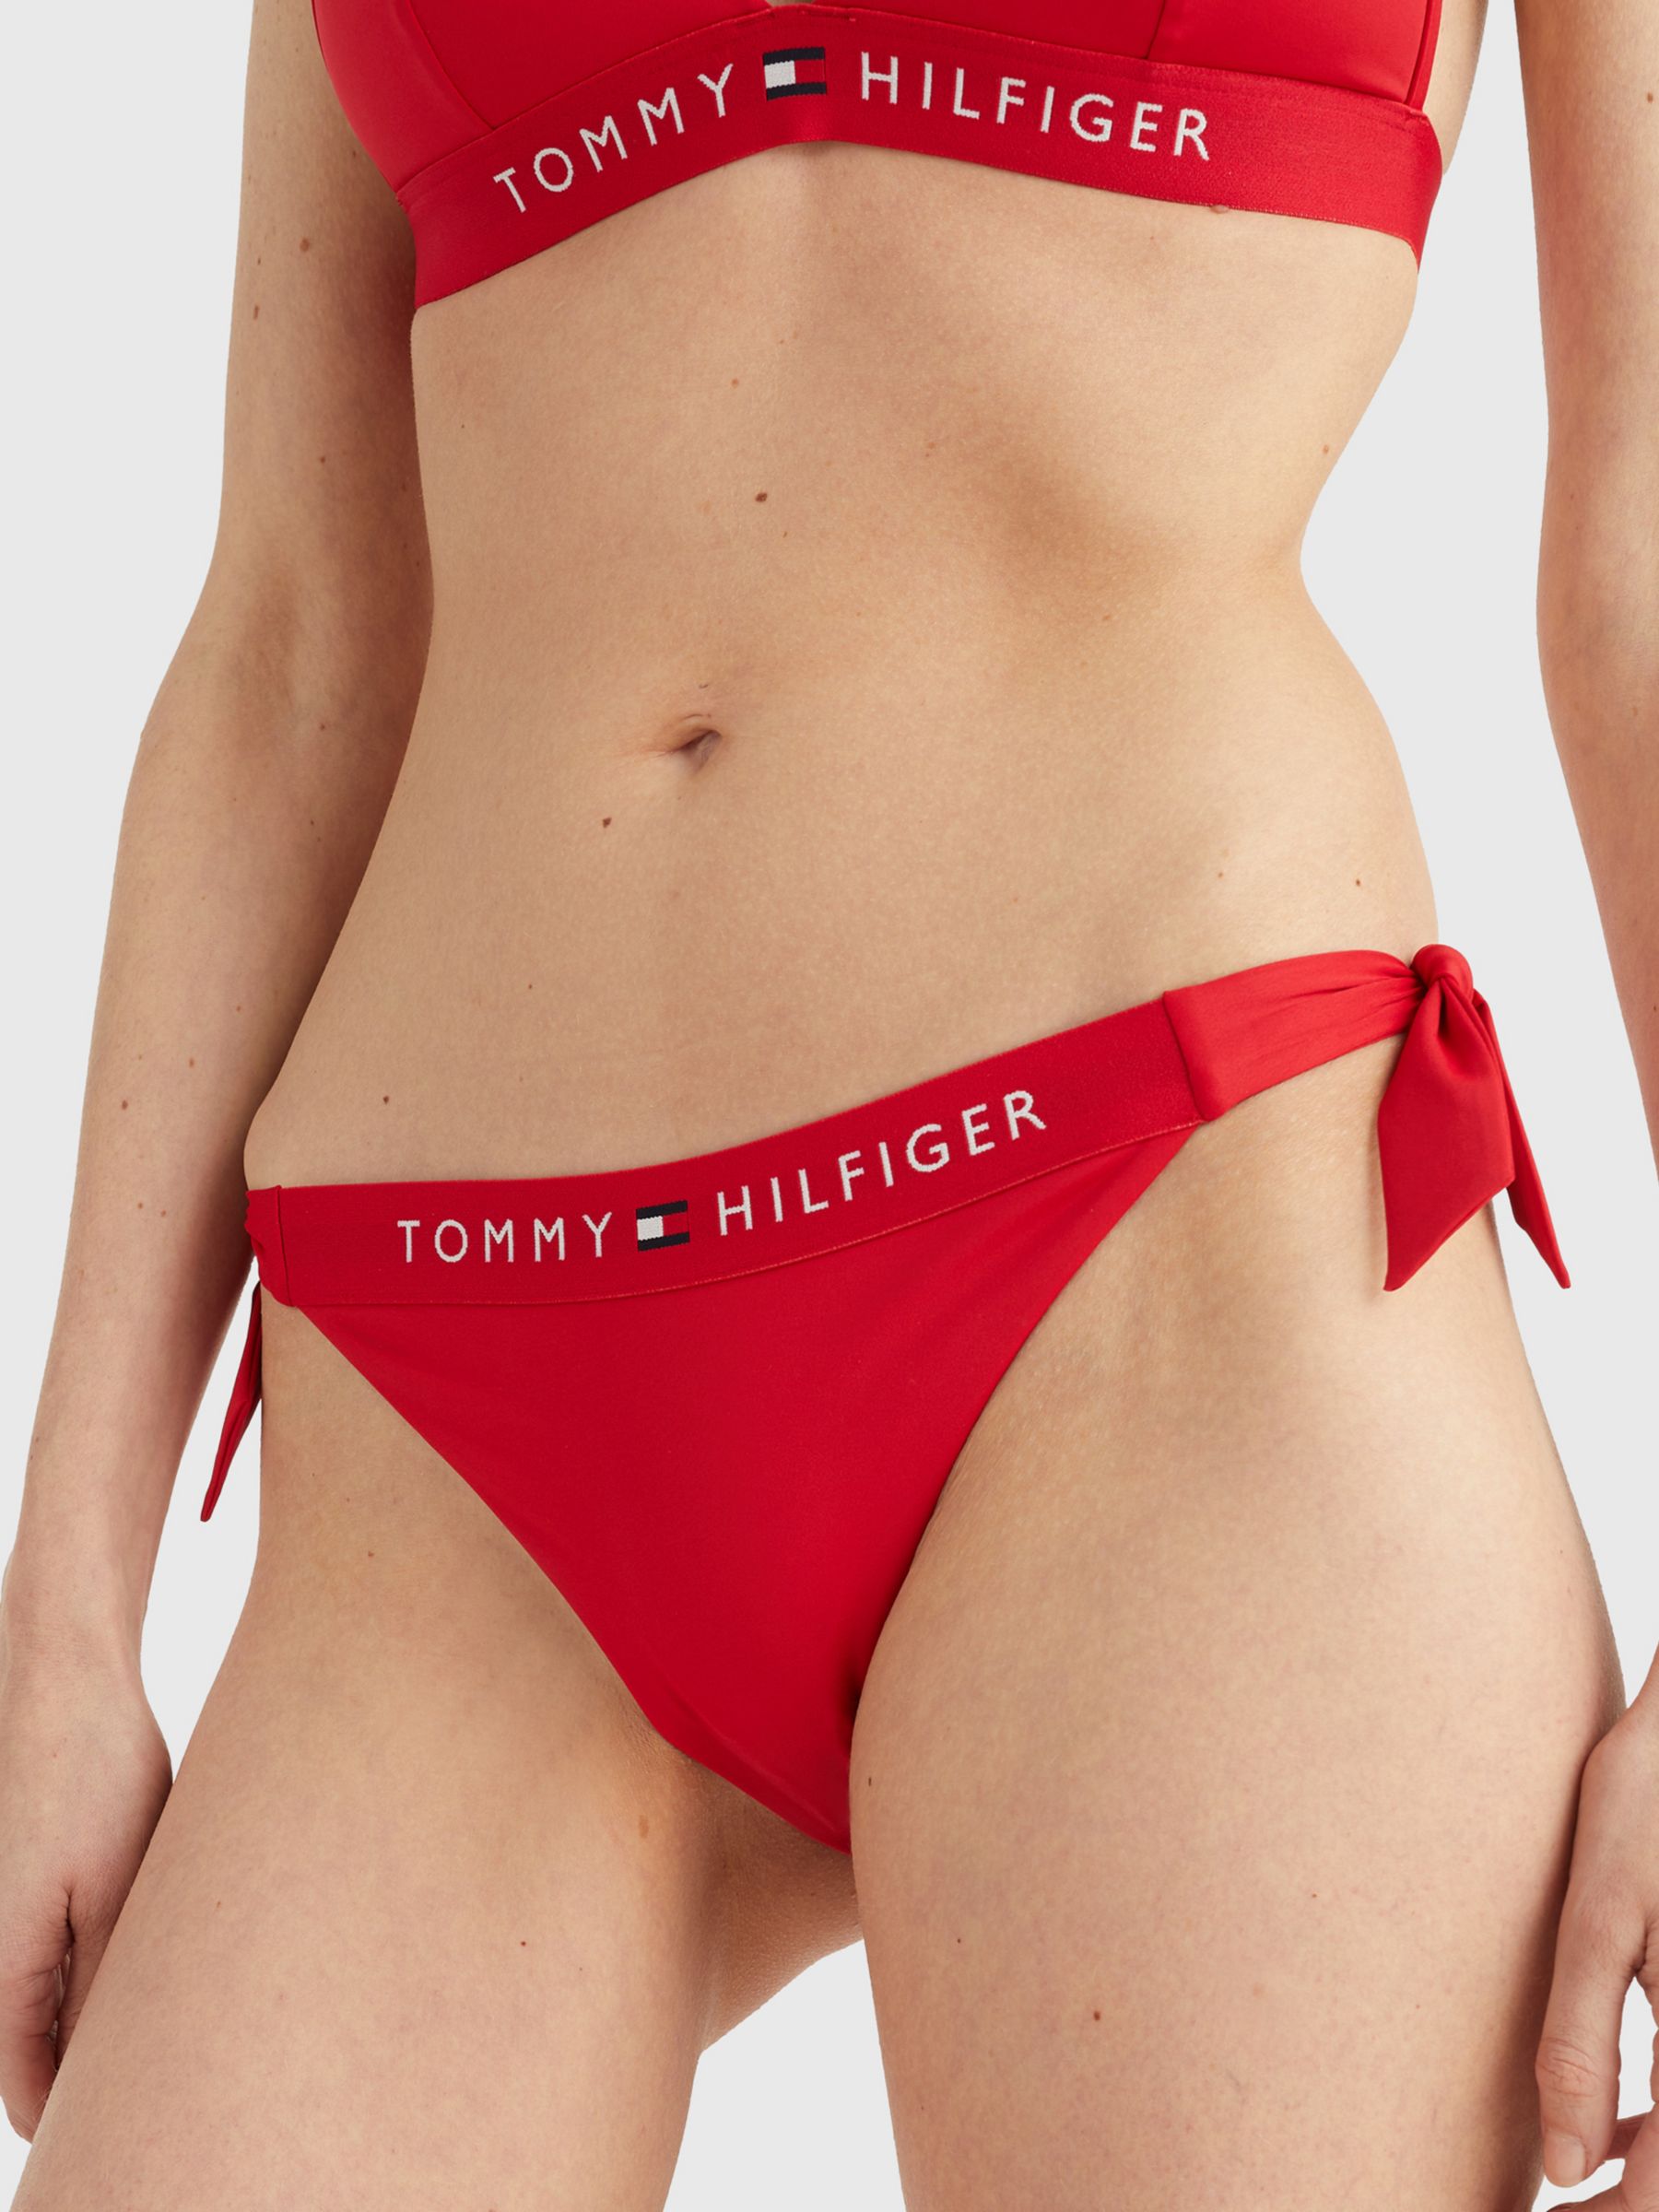 Tommy Hilfiger Cheeky Side Tie Bikini Bottoms, Primary Red, XS